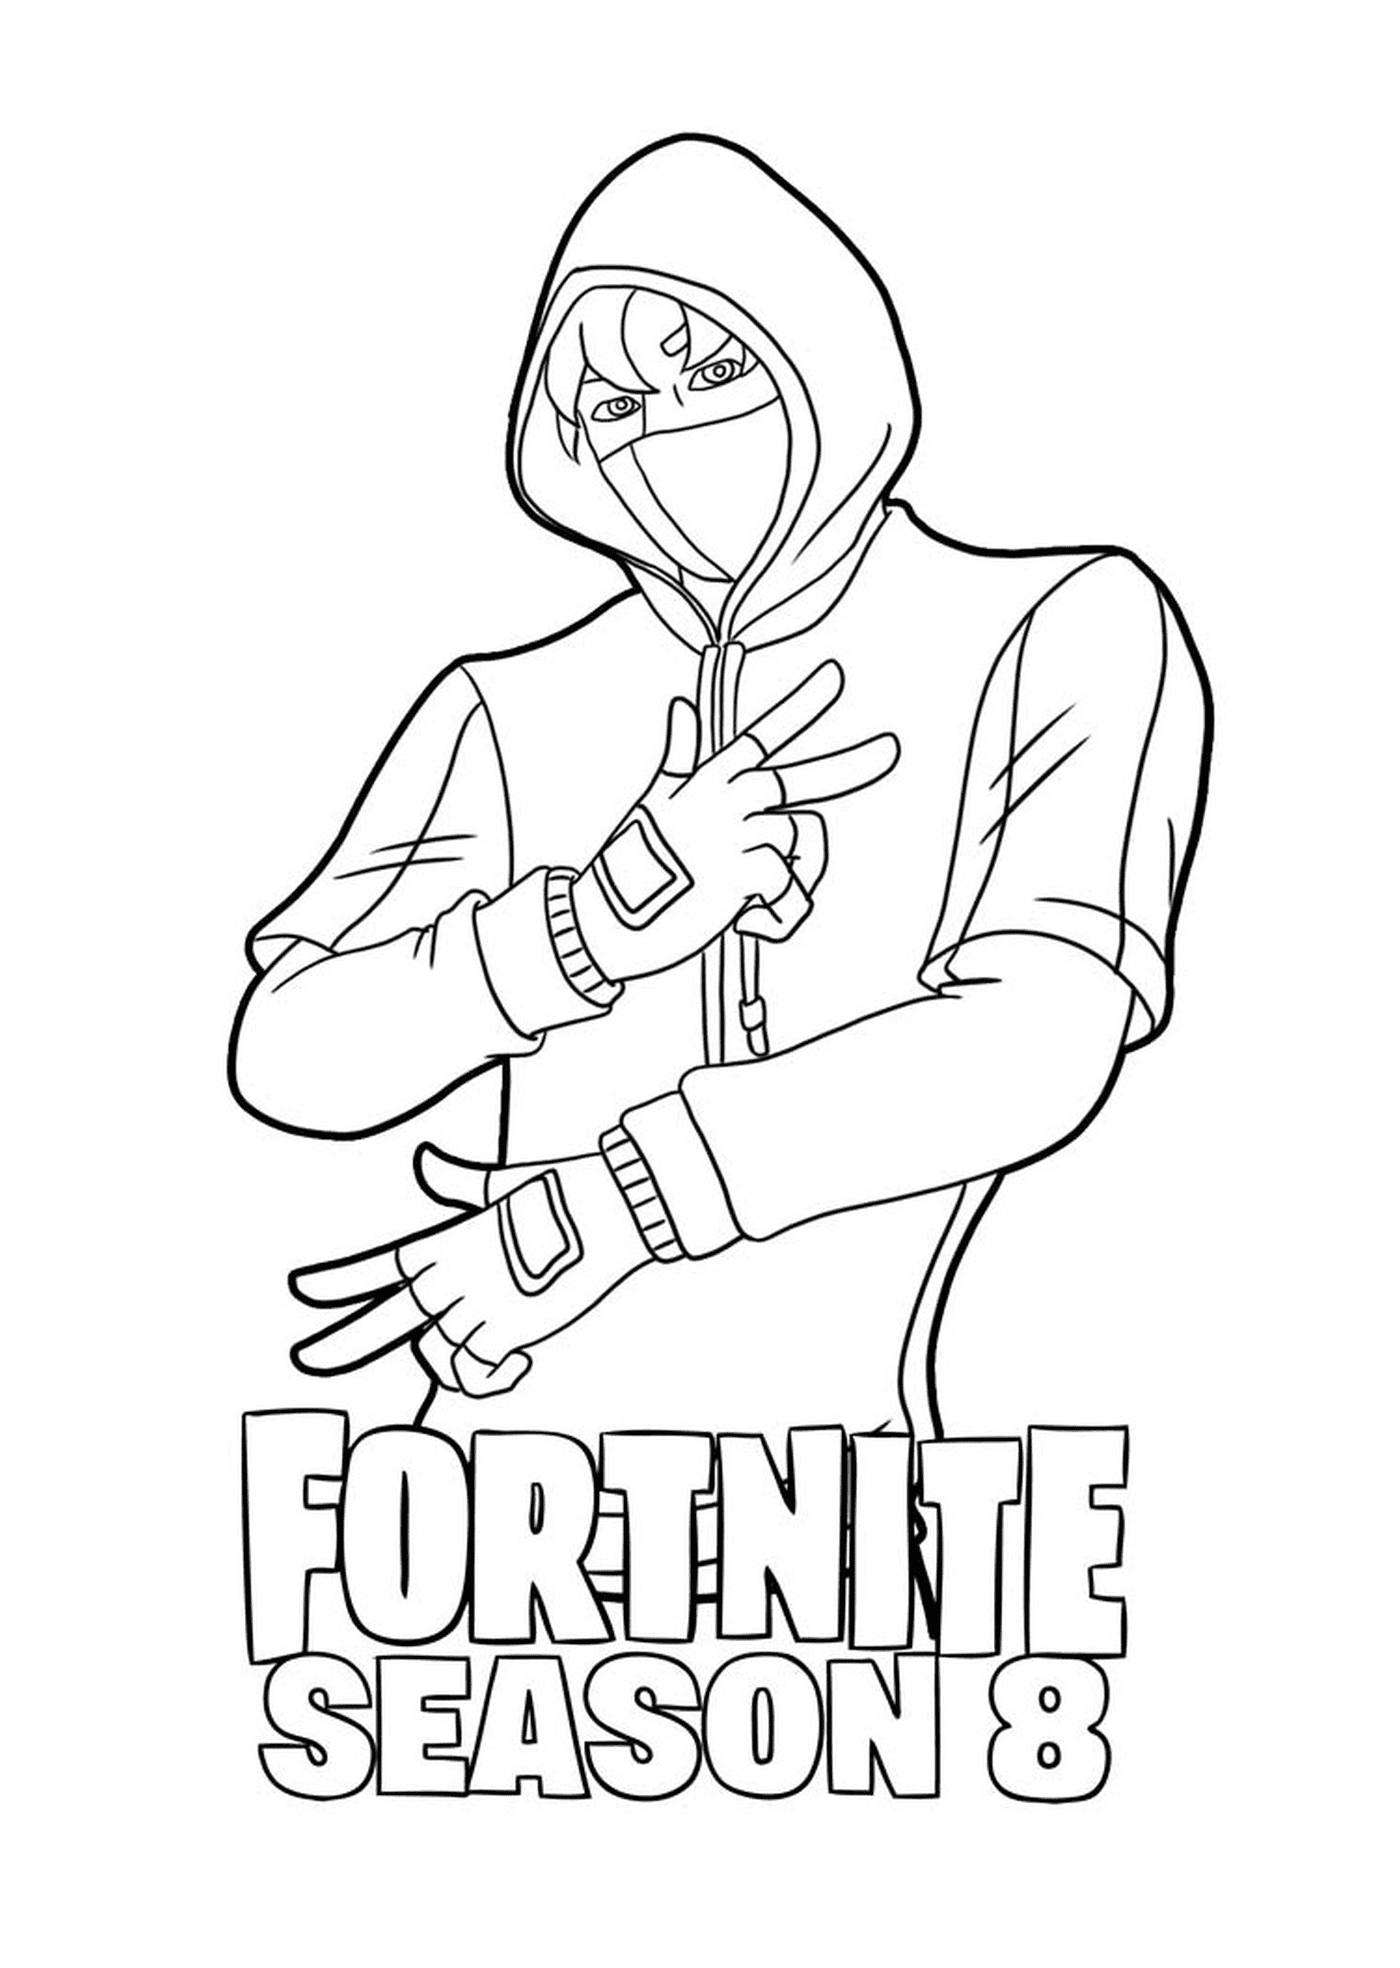  Ikonik, no one with a mask 